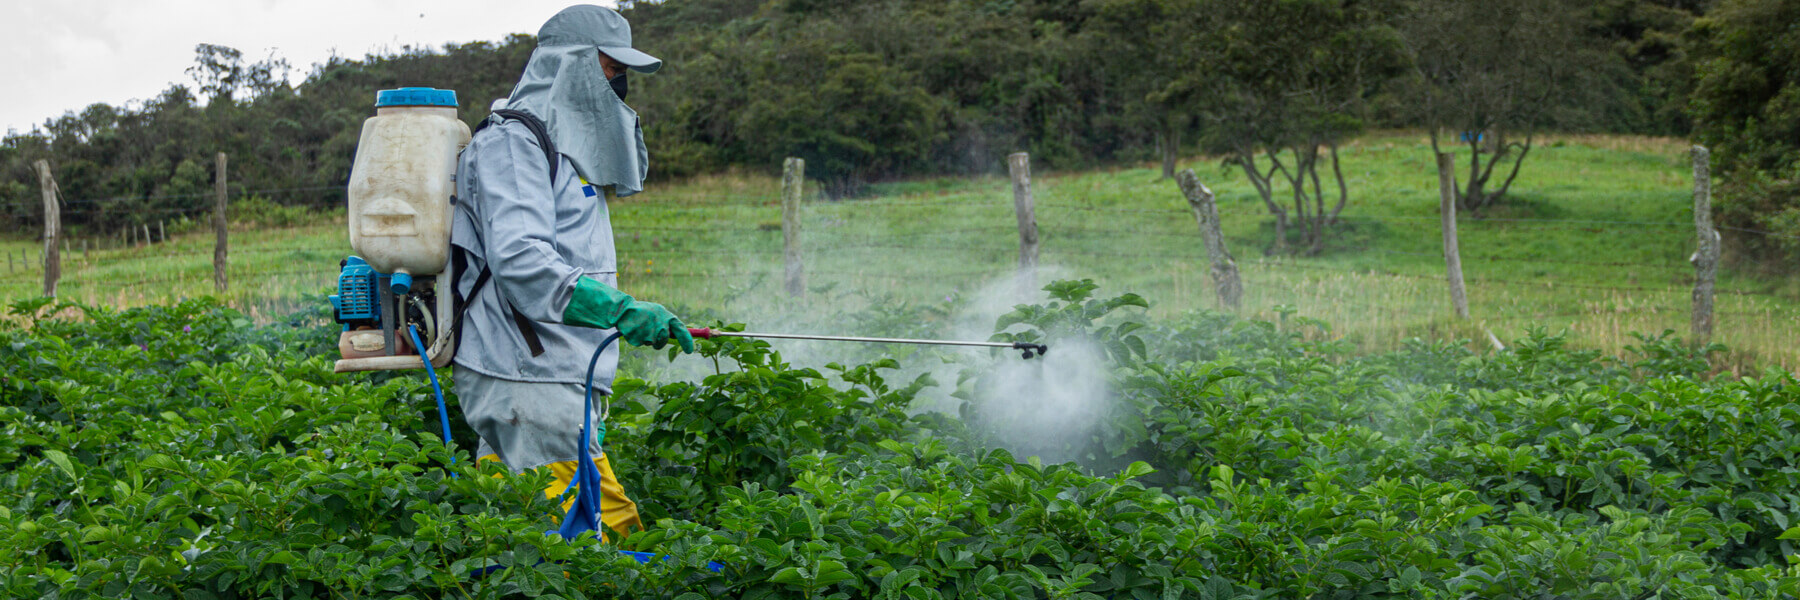 Farmer applying insecticide products on potato crop